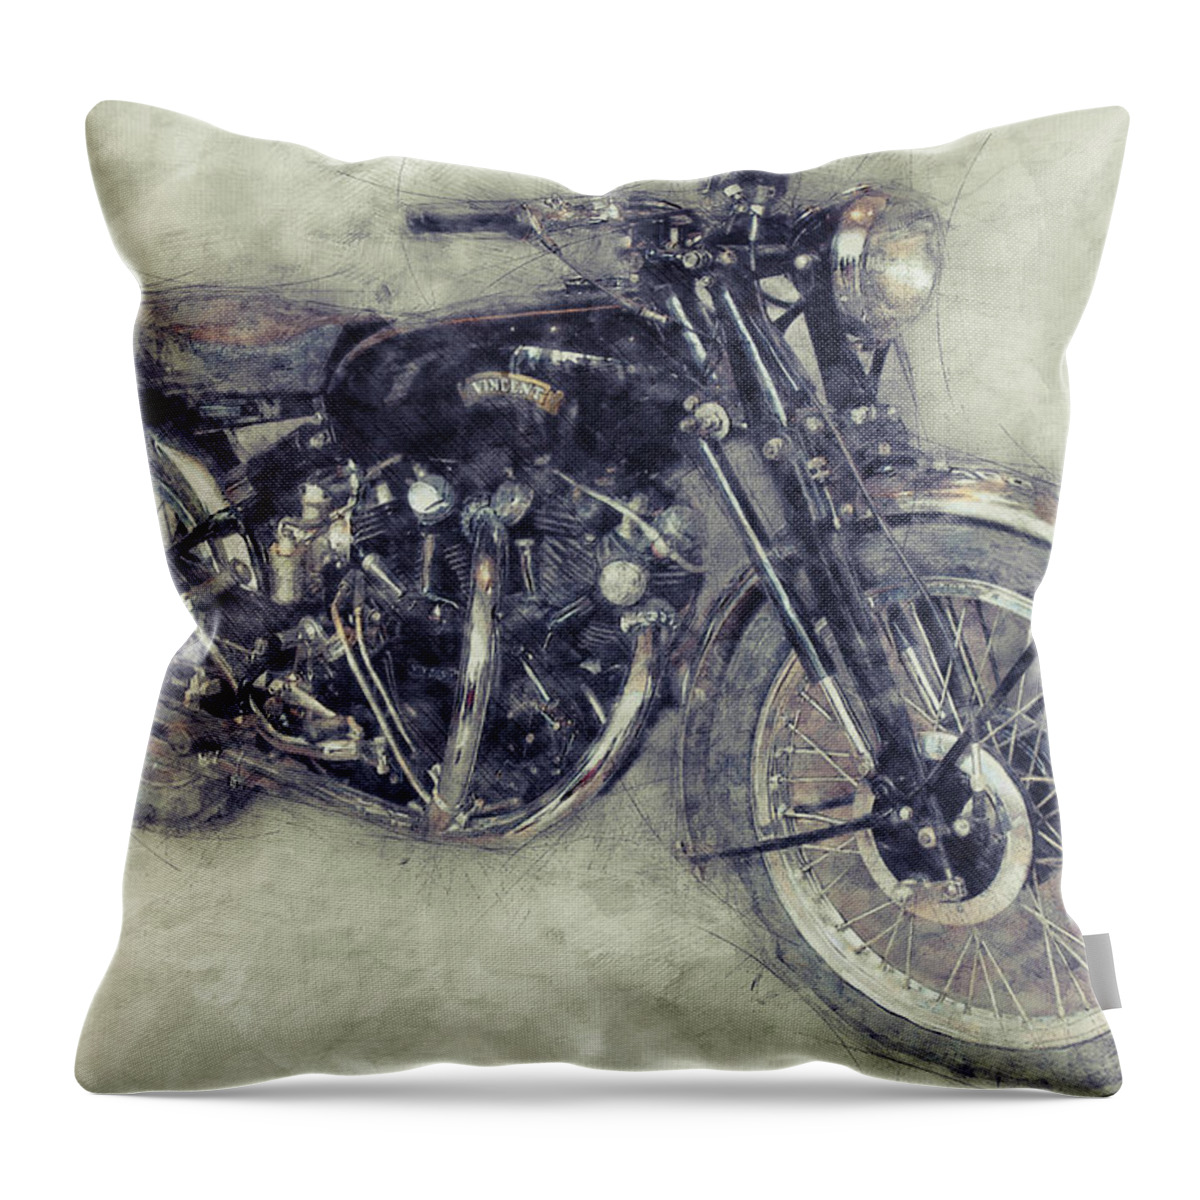 Vincent Black Shadow Throw Pillow featuring the mixed media Vincent Black Shadow 1 - Standard Motorcycle - 1948 - Motorcycle Poster - Automotive Art by Studio Grafiikka